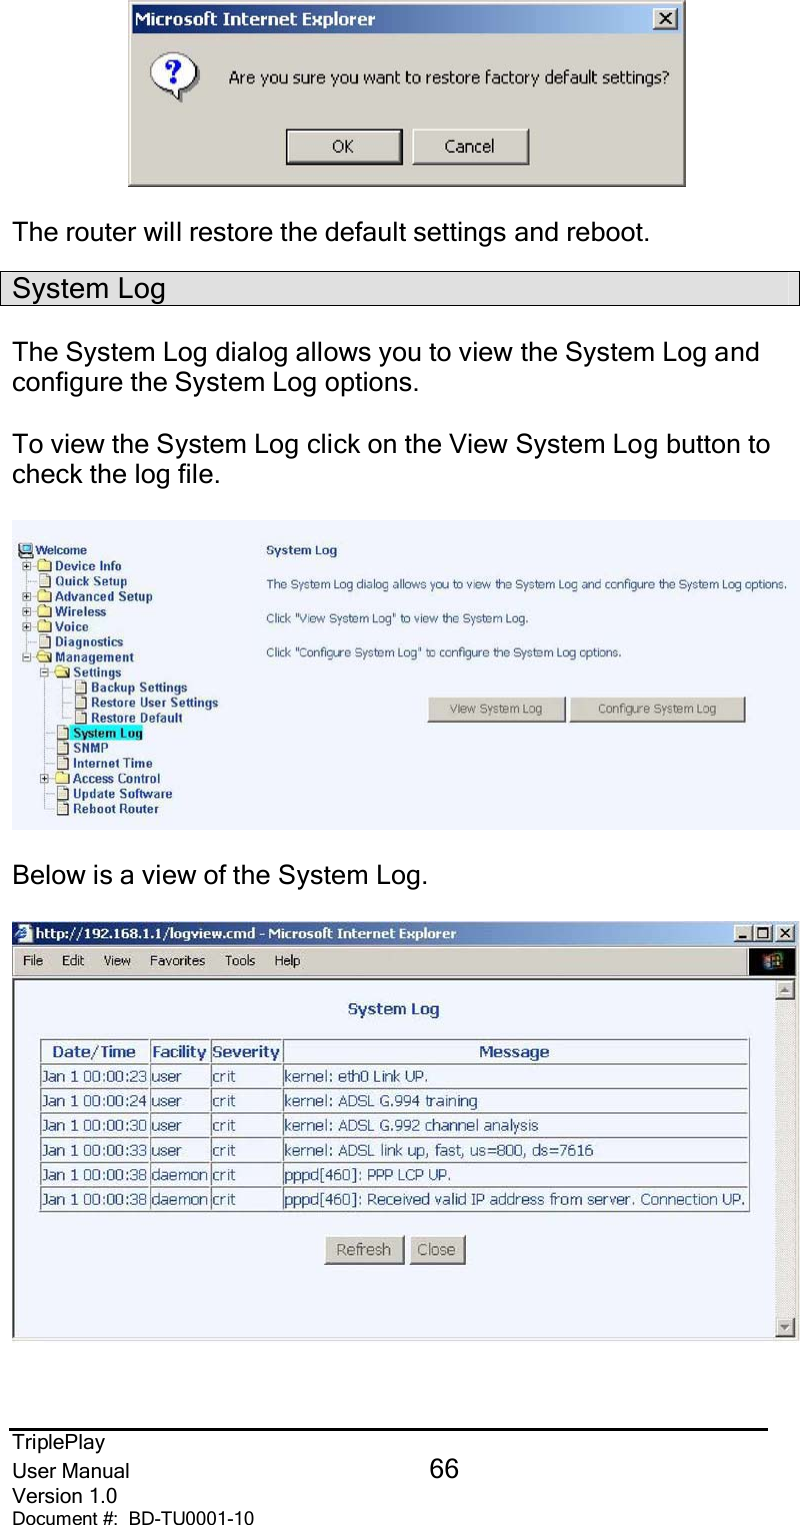 TriplePlayUser Manual 66Version 1.0Document #:  BD-TU0001-10The router will restore the default settings and reboot.System LogThe System Log dialog allows you to view the System Log andconfigure the System Log options.To view the System Log click on the View System Log button tocheck the log file.Below is a view of the System Log.